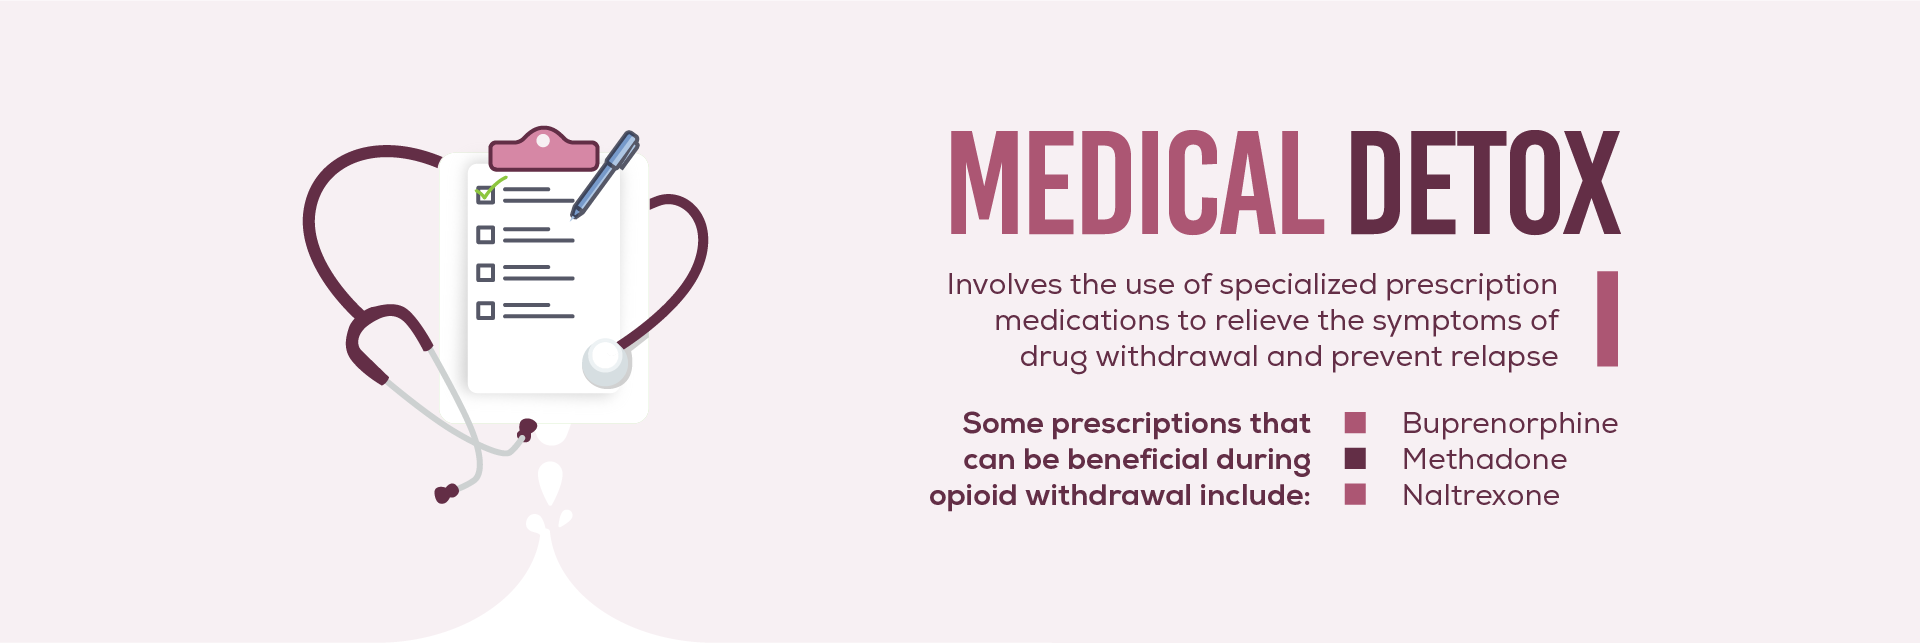 Medical detox involves the use of specialized prescription medications to relieve the symptoms of drug withdrawal and prevent relapse. Some prescriptionsthat can be beneficial during opiod withdrawal include buprenorphine, methadone and naltrexone